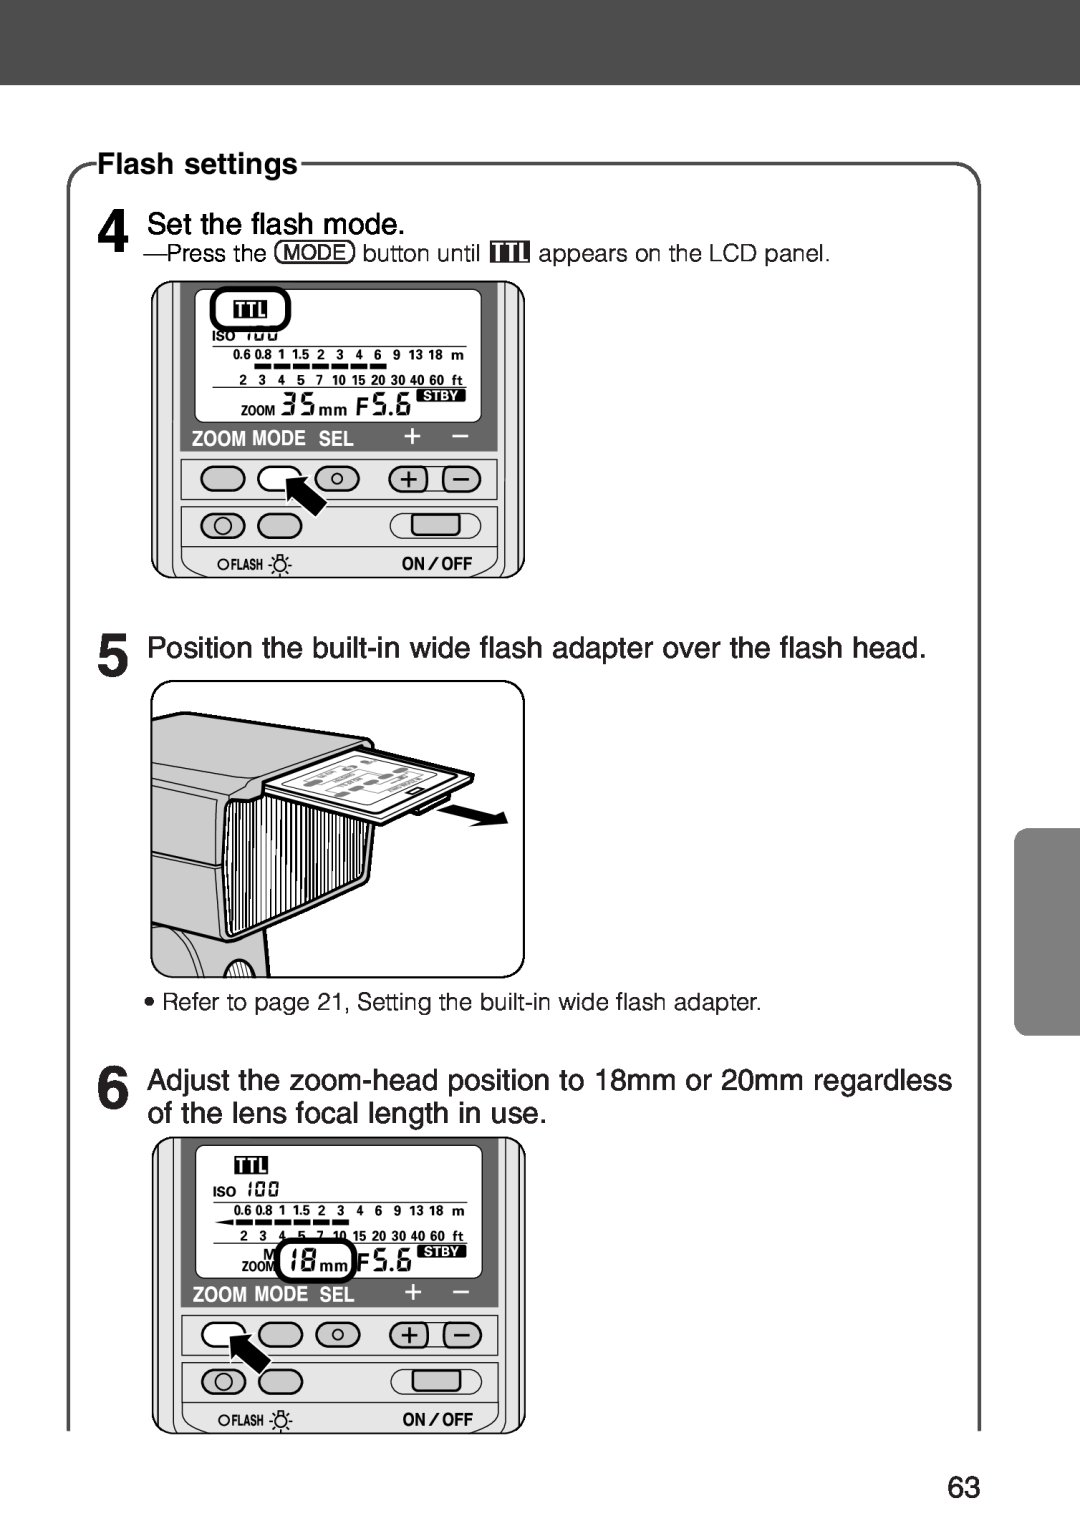 Nikon SB-28 instruction manual Flash settings, 5Position the built-inwide flash adapter over the flash head 